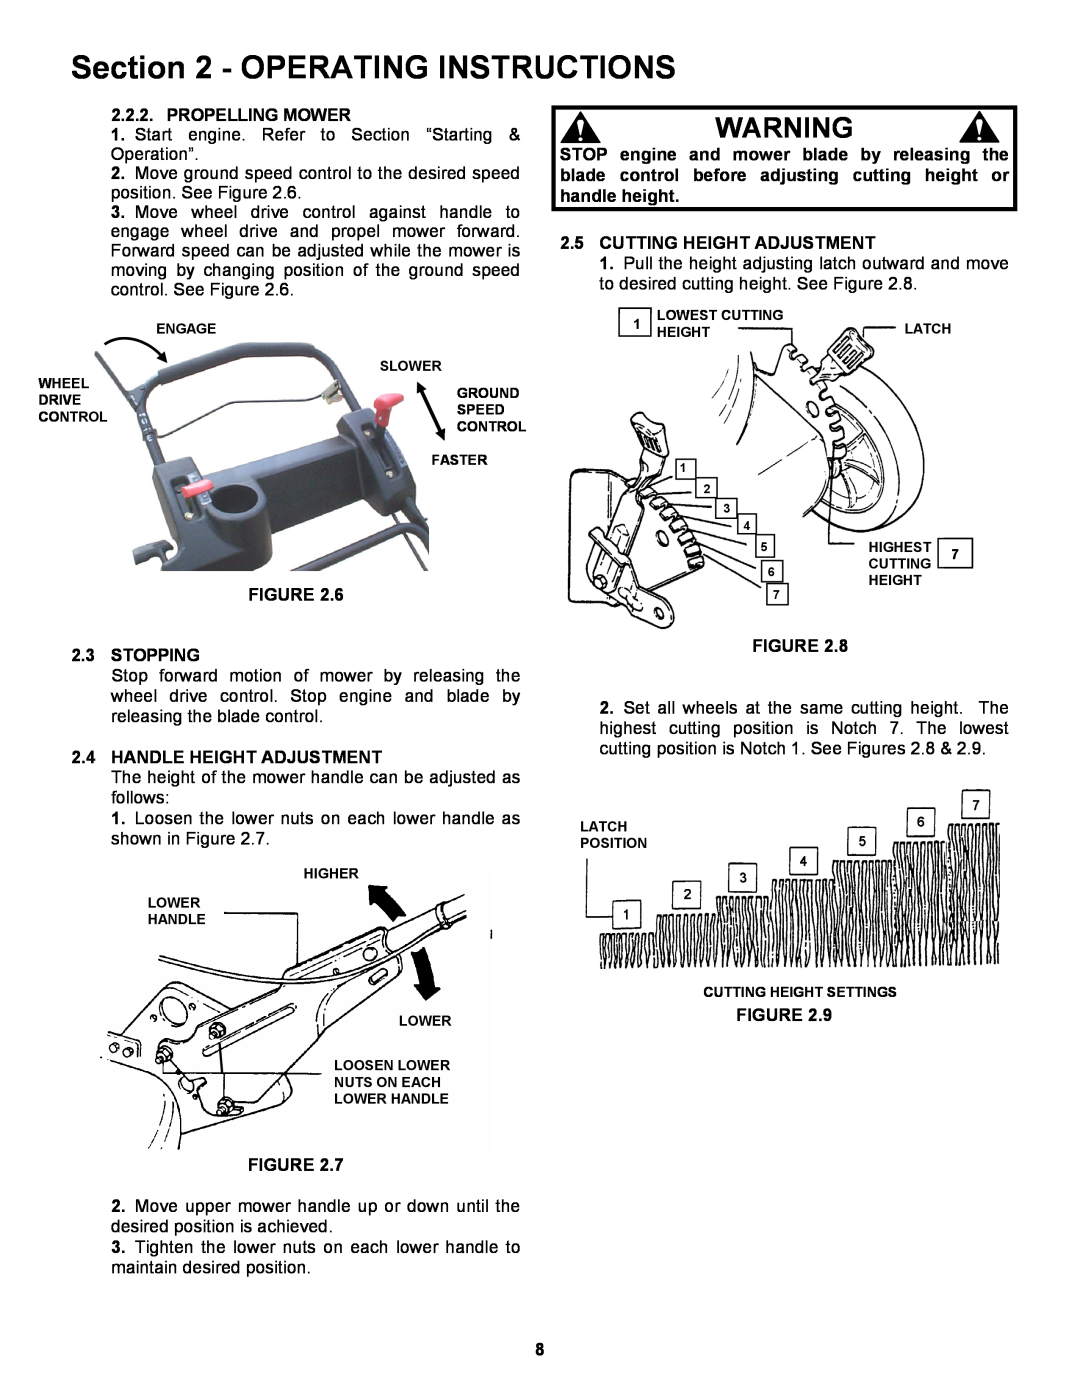 Snapper EP217019BV Operating Instructions, Propelling Mower, Cutting Height Adjustment, Stopping, Handle Height Adjustment 